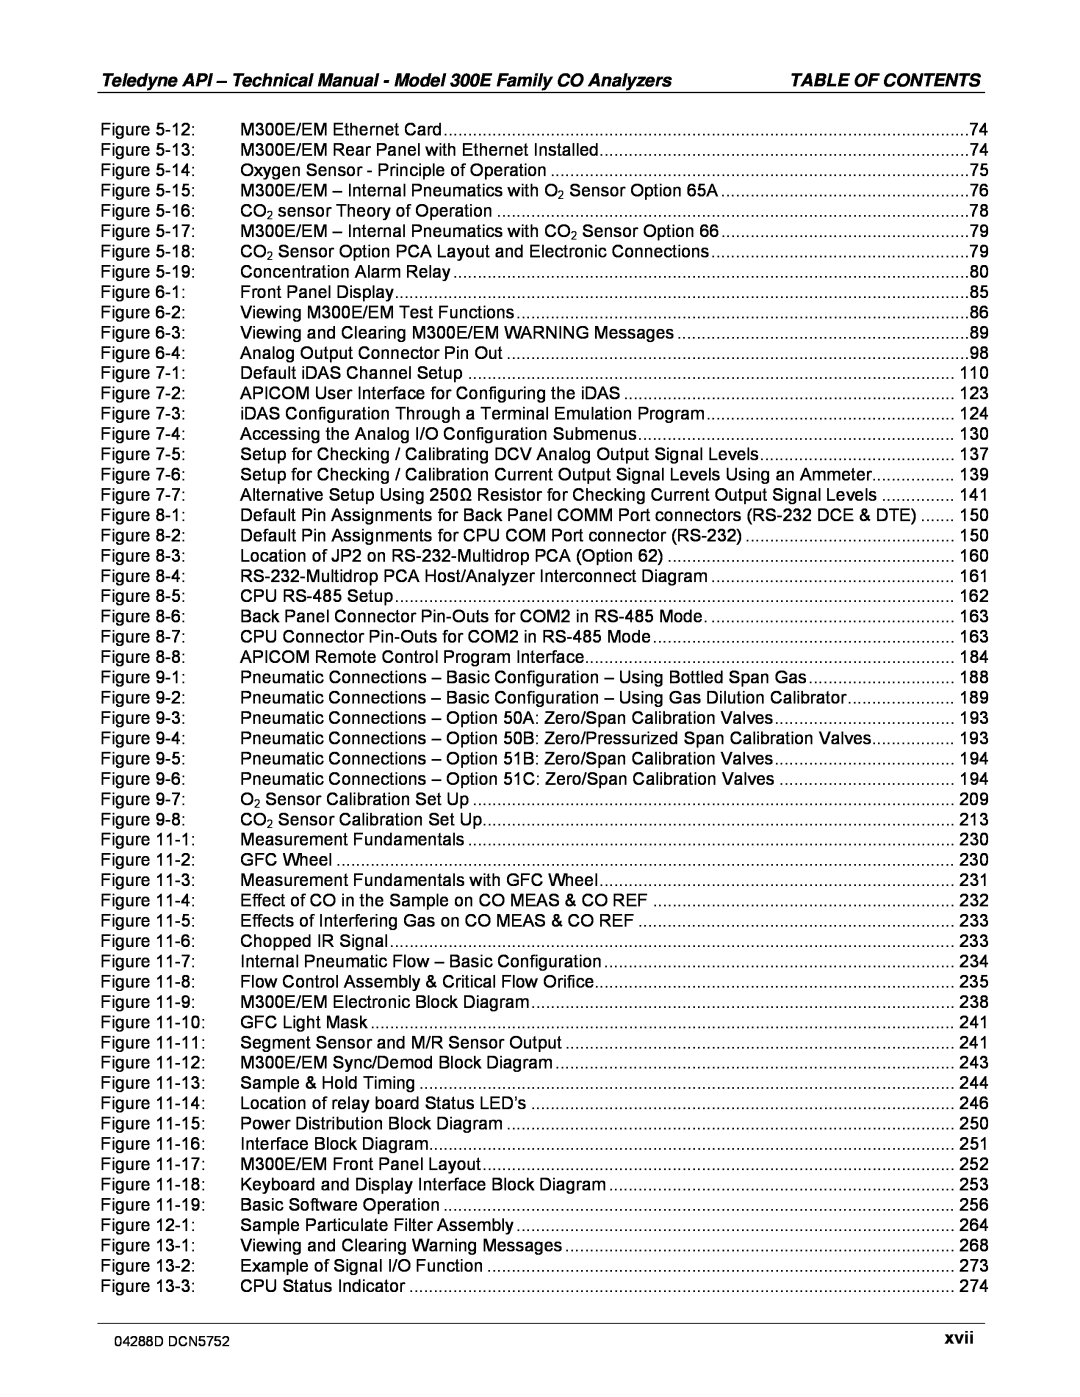 Teledyne M300EM operation manual Table Of Contents 